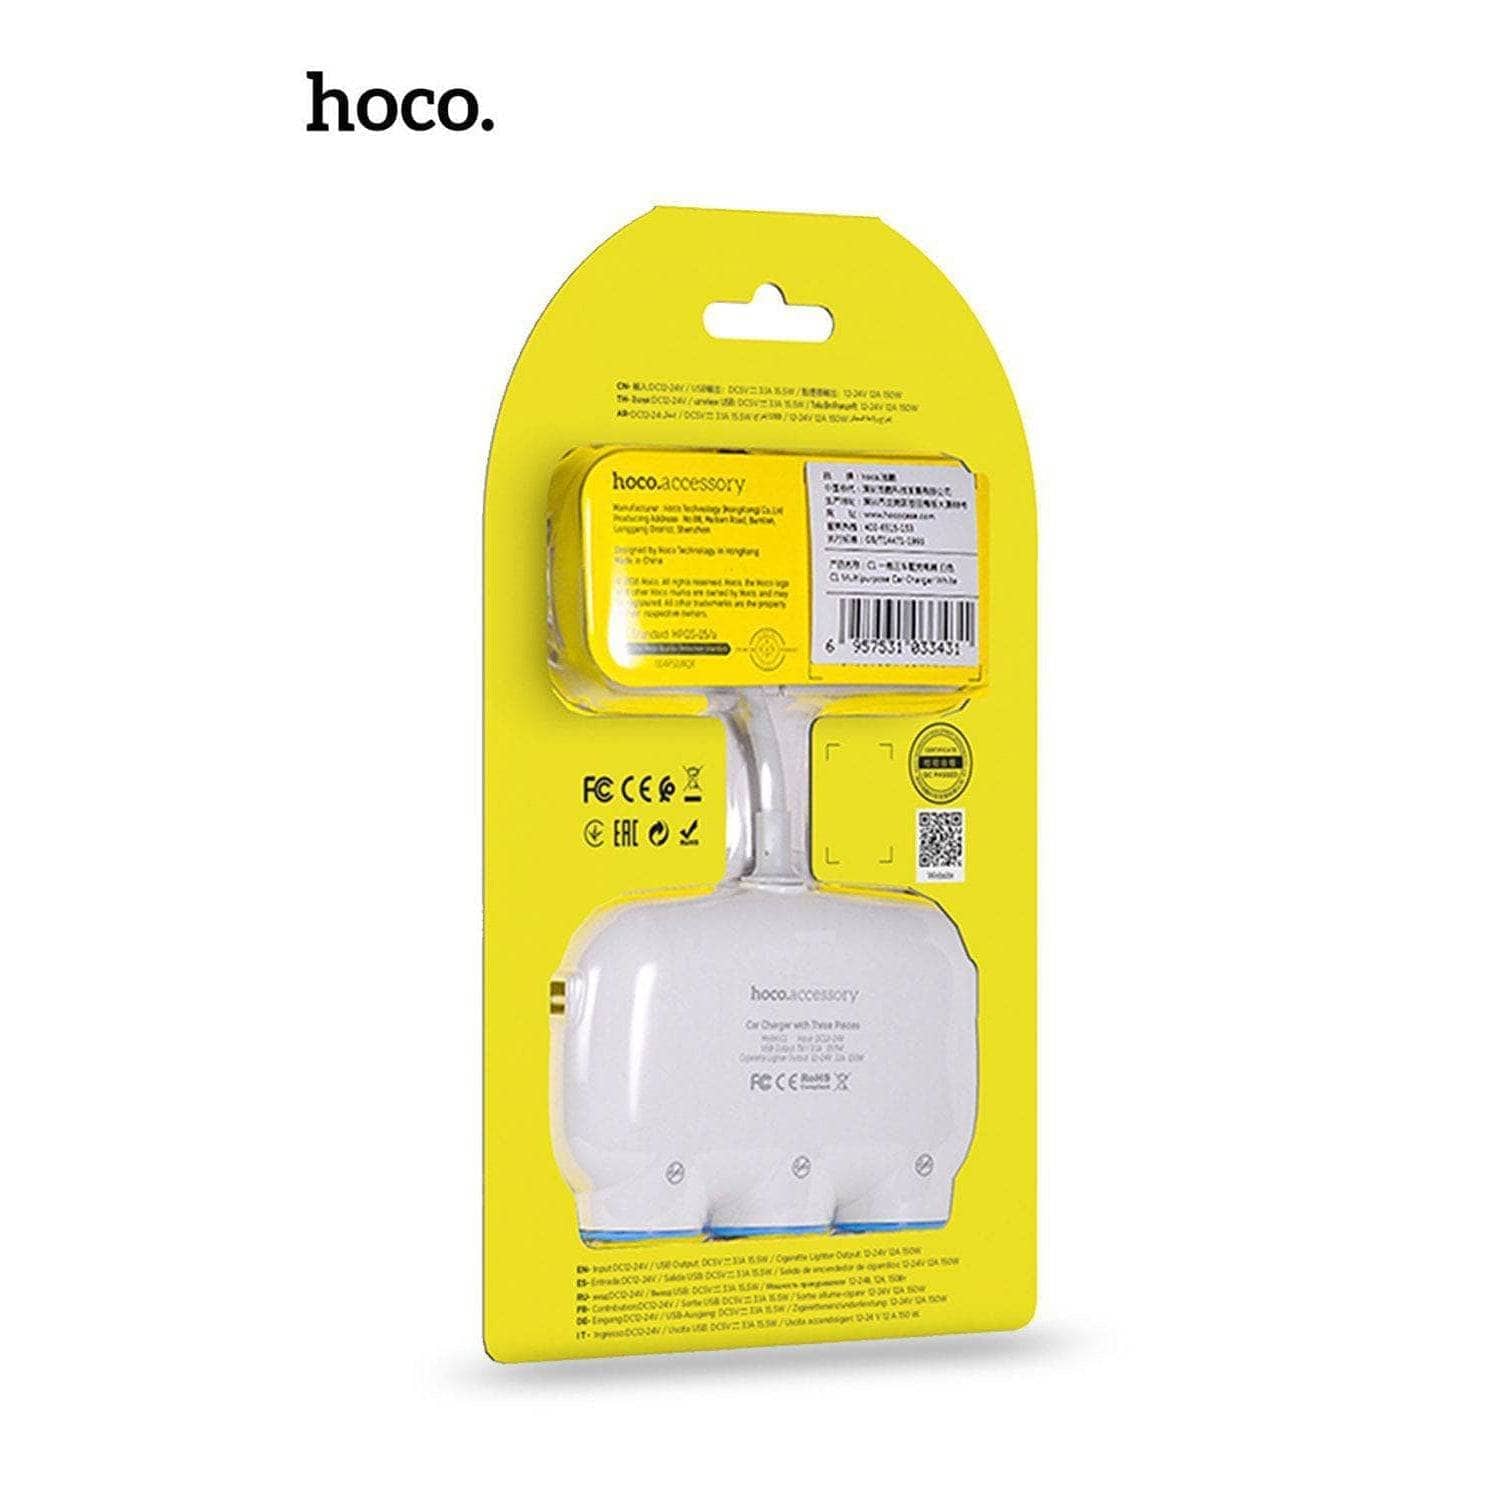 Hoco C1 Car Charger Splitter - White-Car Charger-Hoco-www.PhoneGuy.com.au